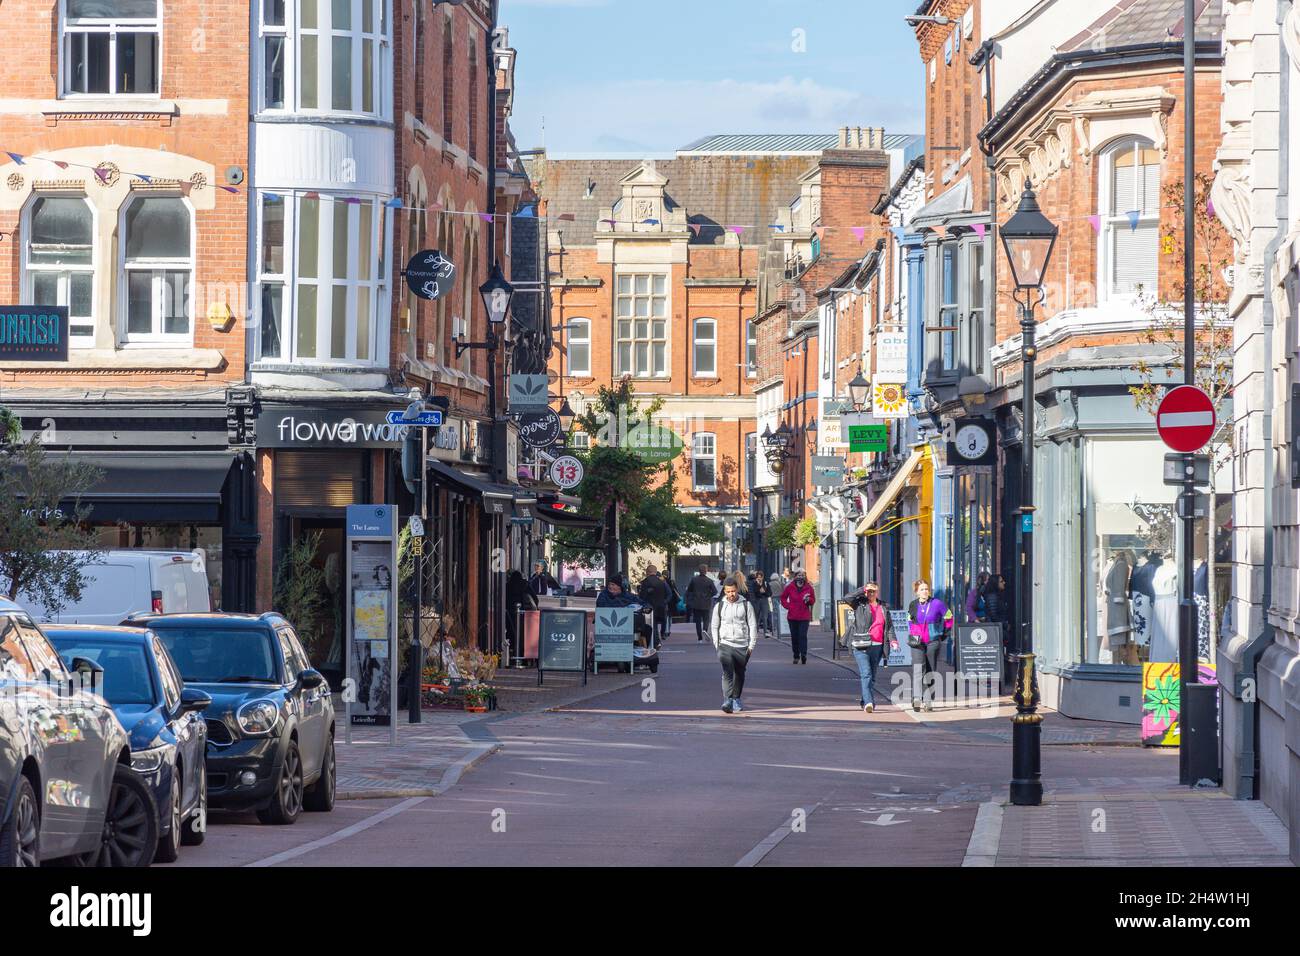 The Lanes, Loseby Lane, City Centre, City of Leicester, Leicestershire, England, United Kingdom Stock Photo